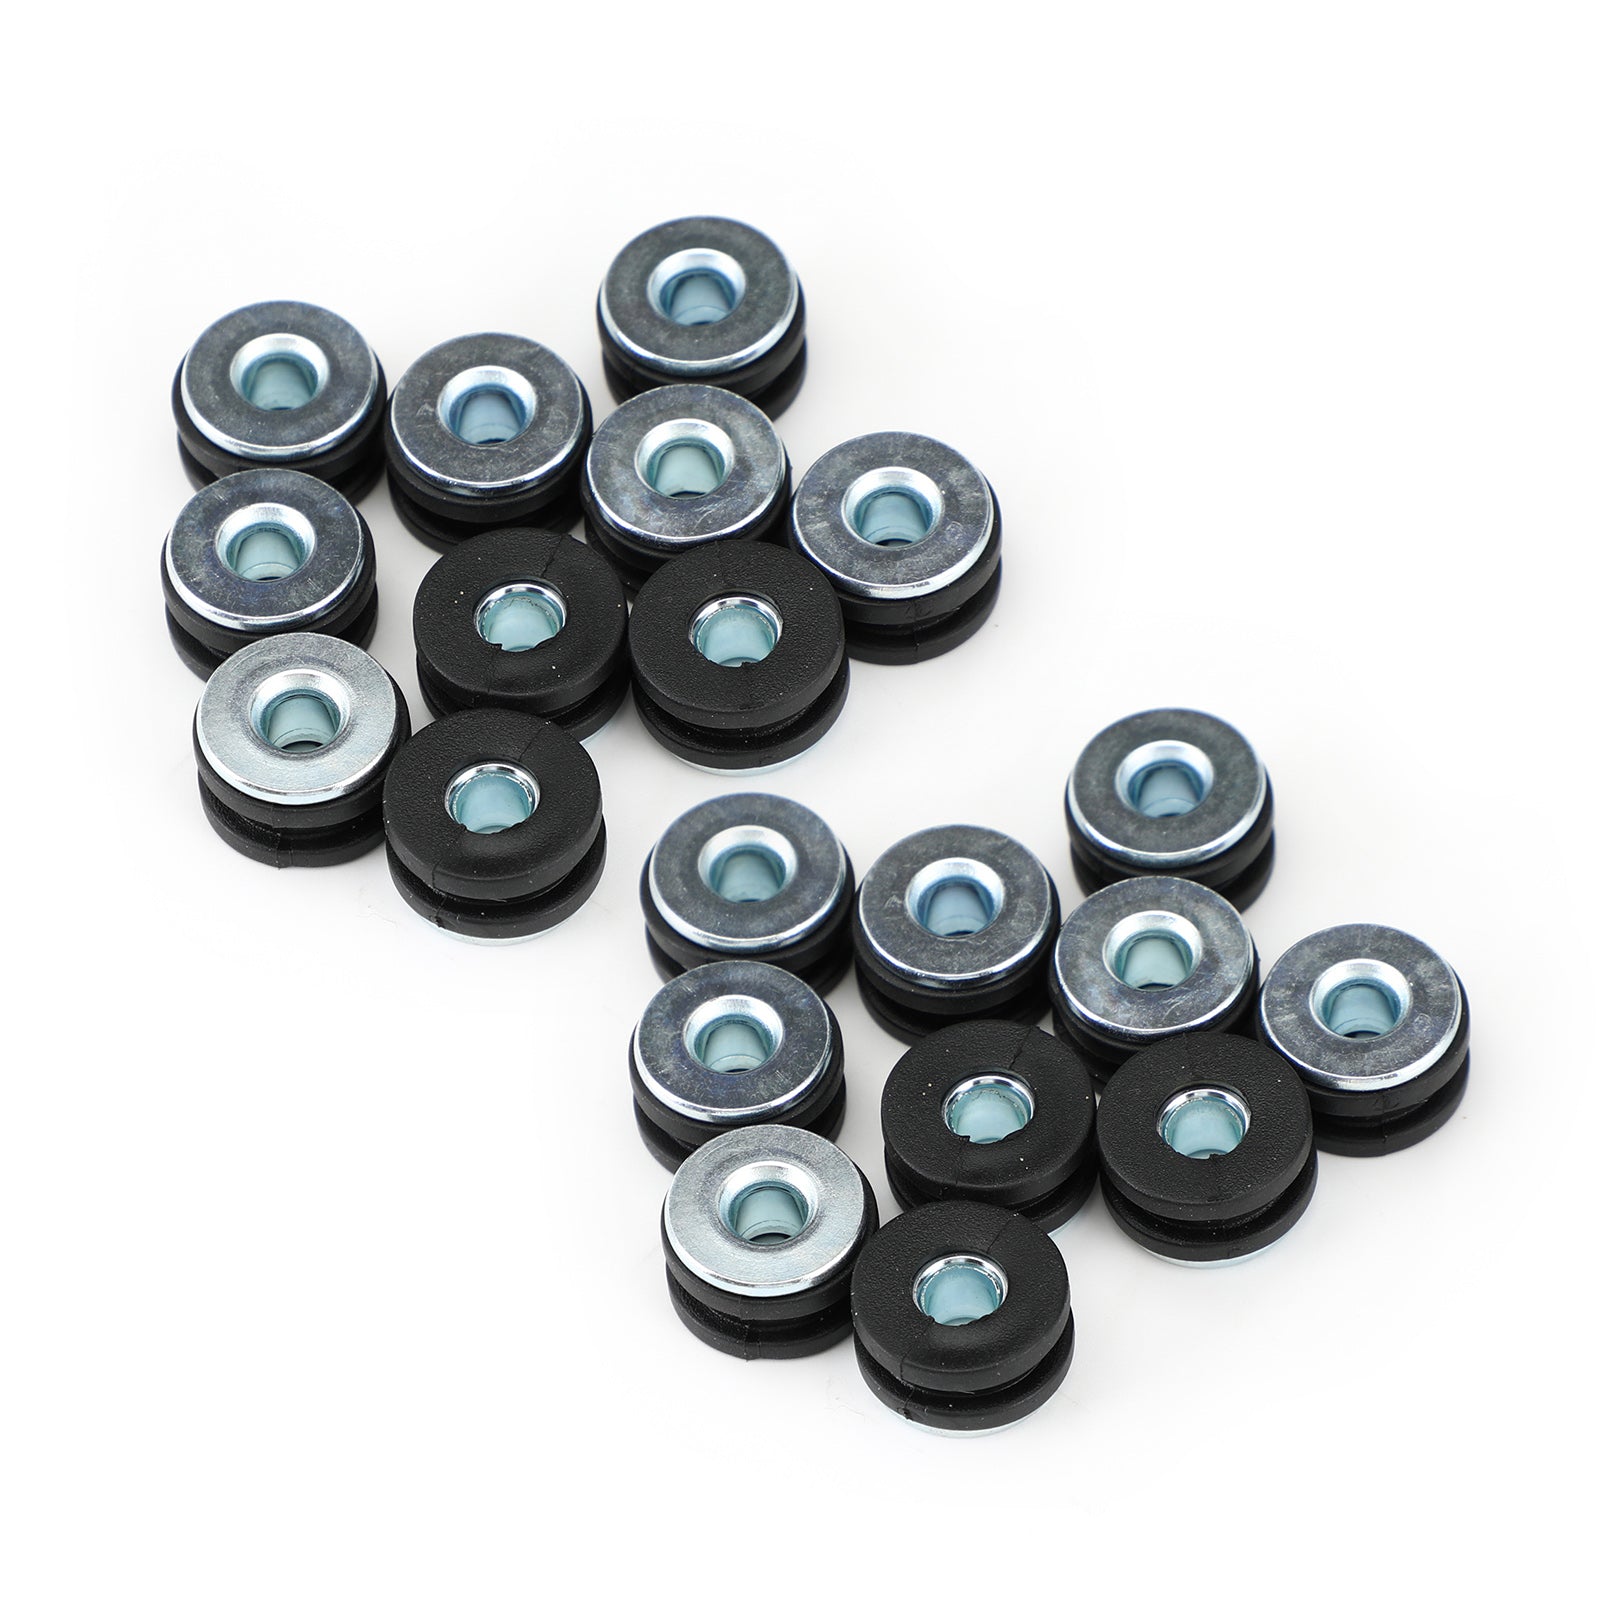 20 Pack Motorcycle Rubber Grommets Assortment Fit for Suzuki Fairing Universal